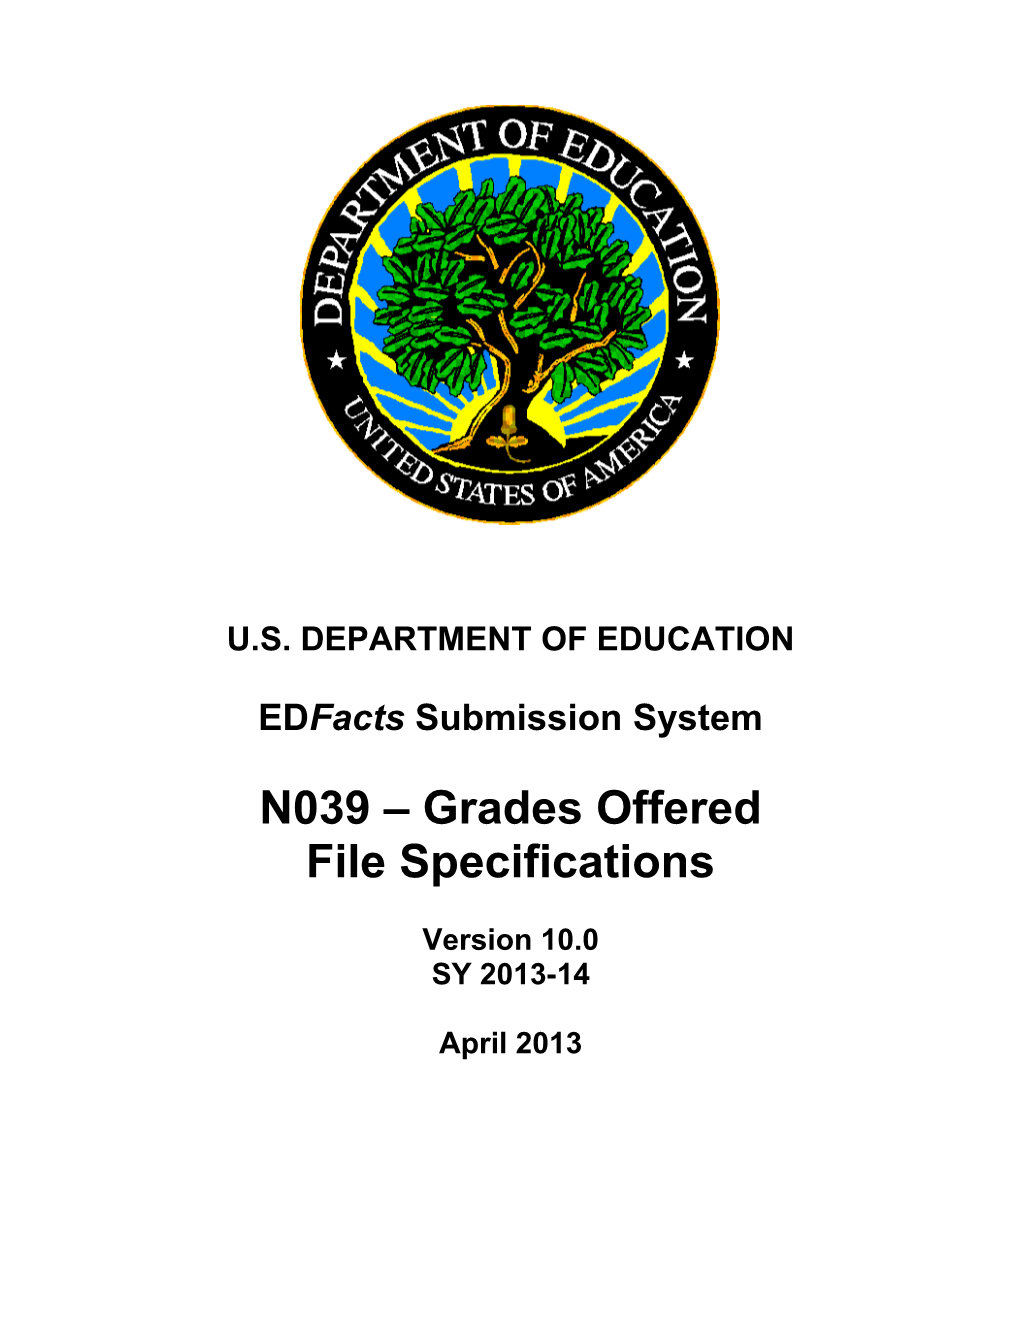 Grades Offered File Specifications